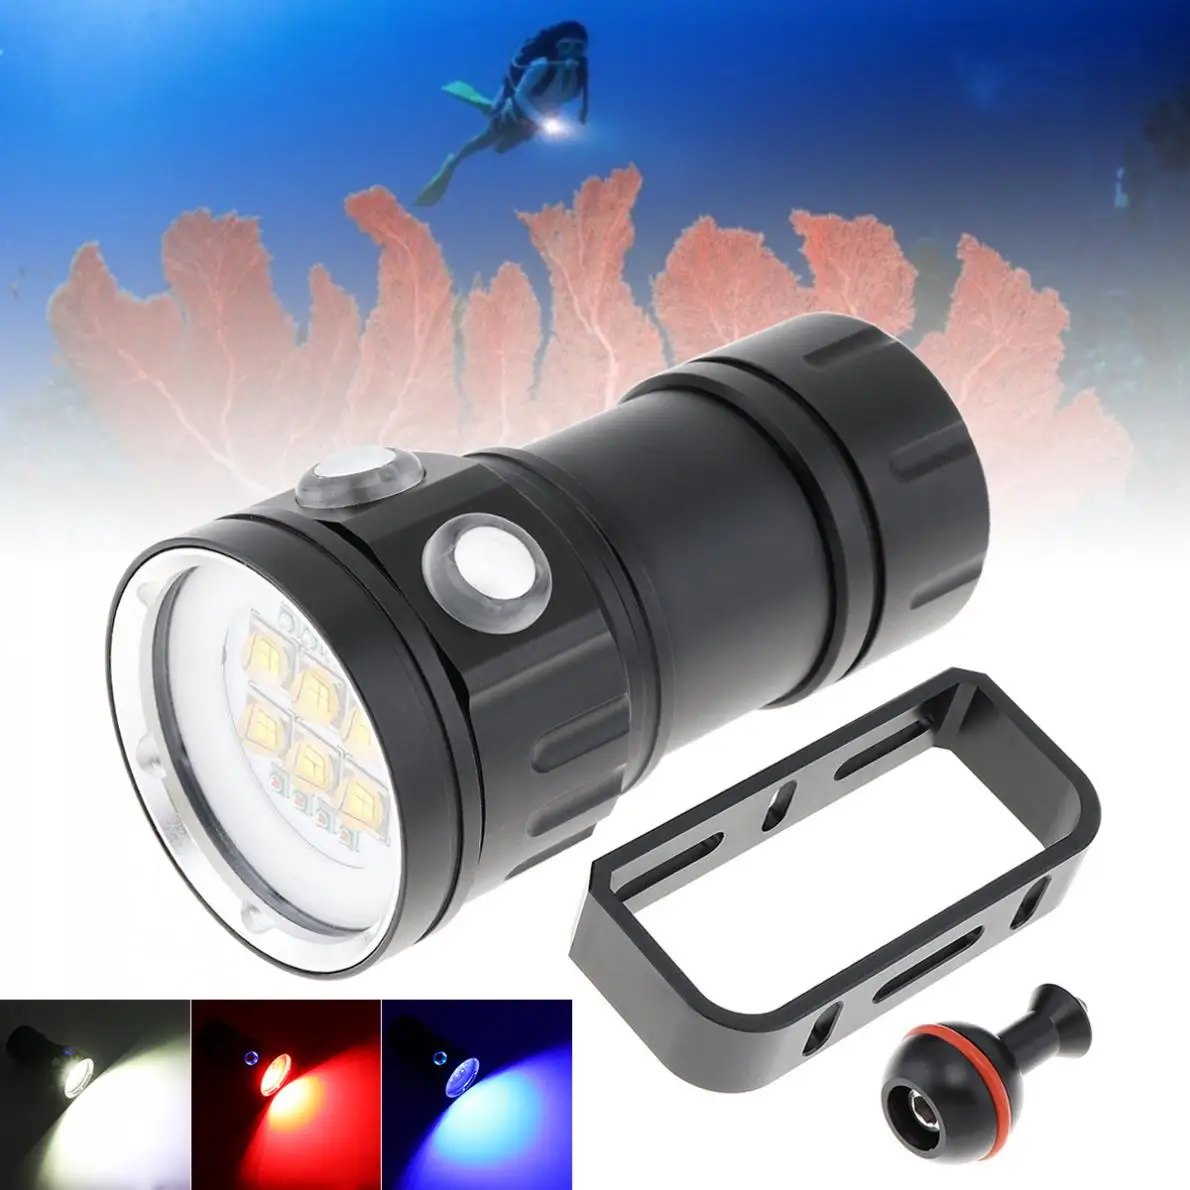 

300W Six 9090 White XML2+Four XPE Red R5+Four XPE Blue R5 LED Underwater 100m Diving Light with Spherical Bracket for Fill Light